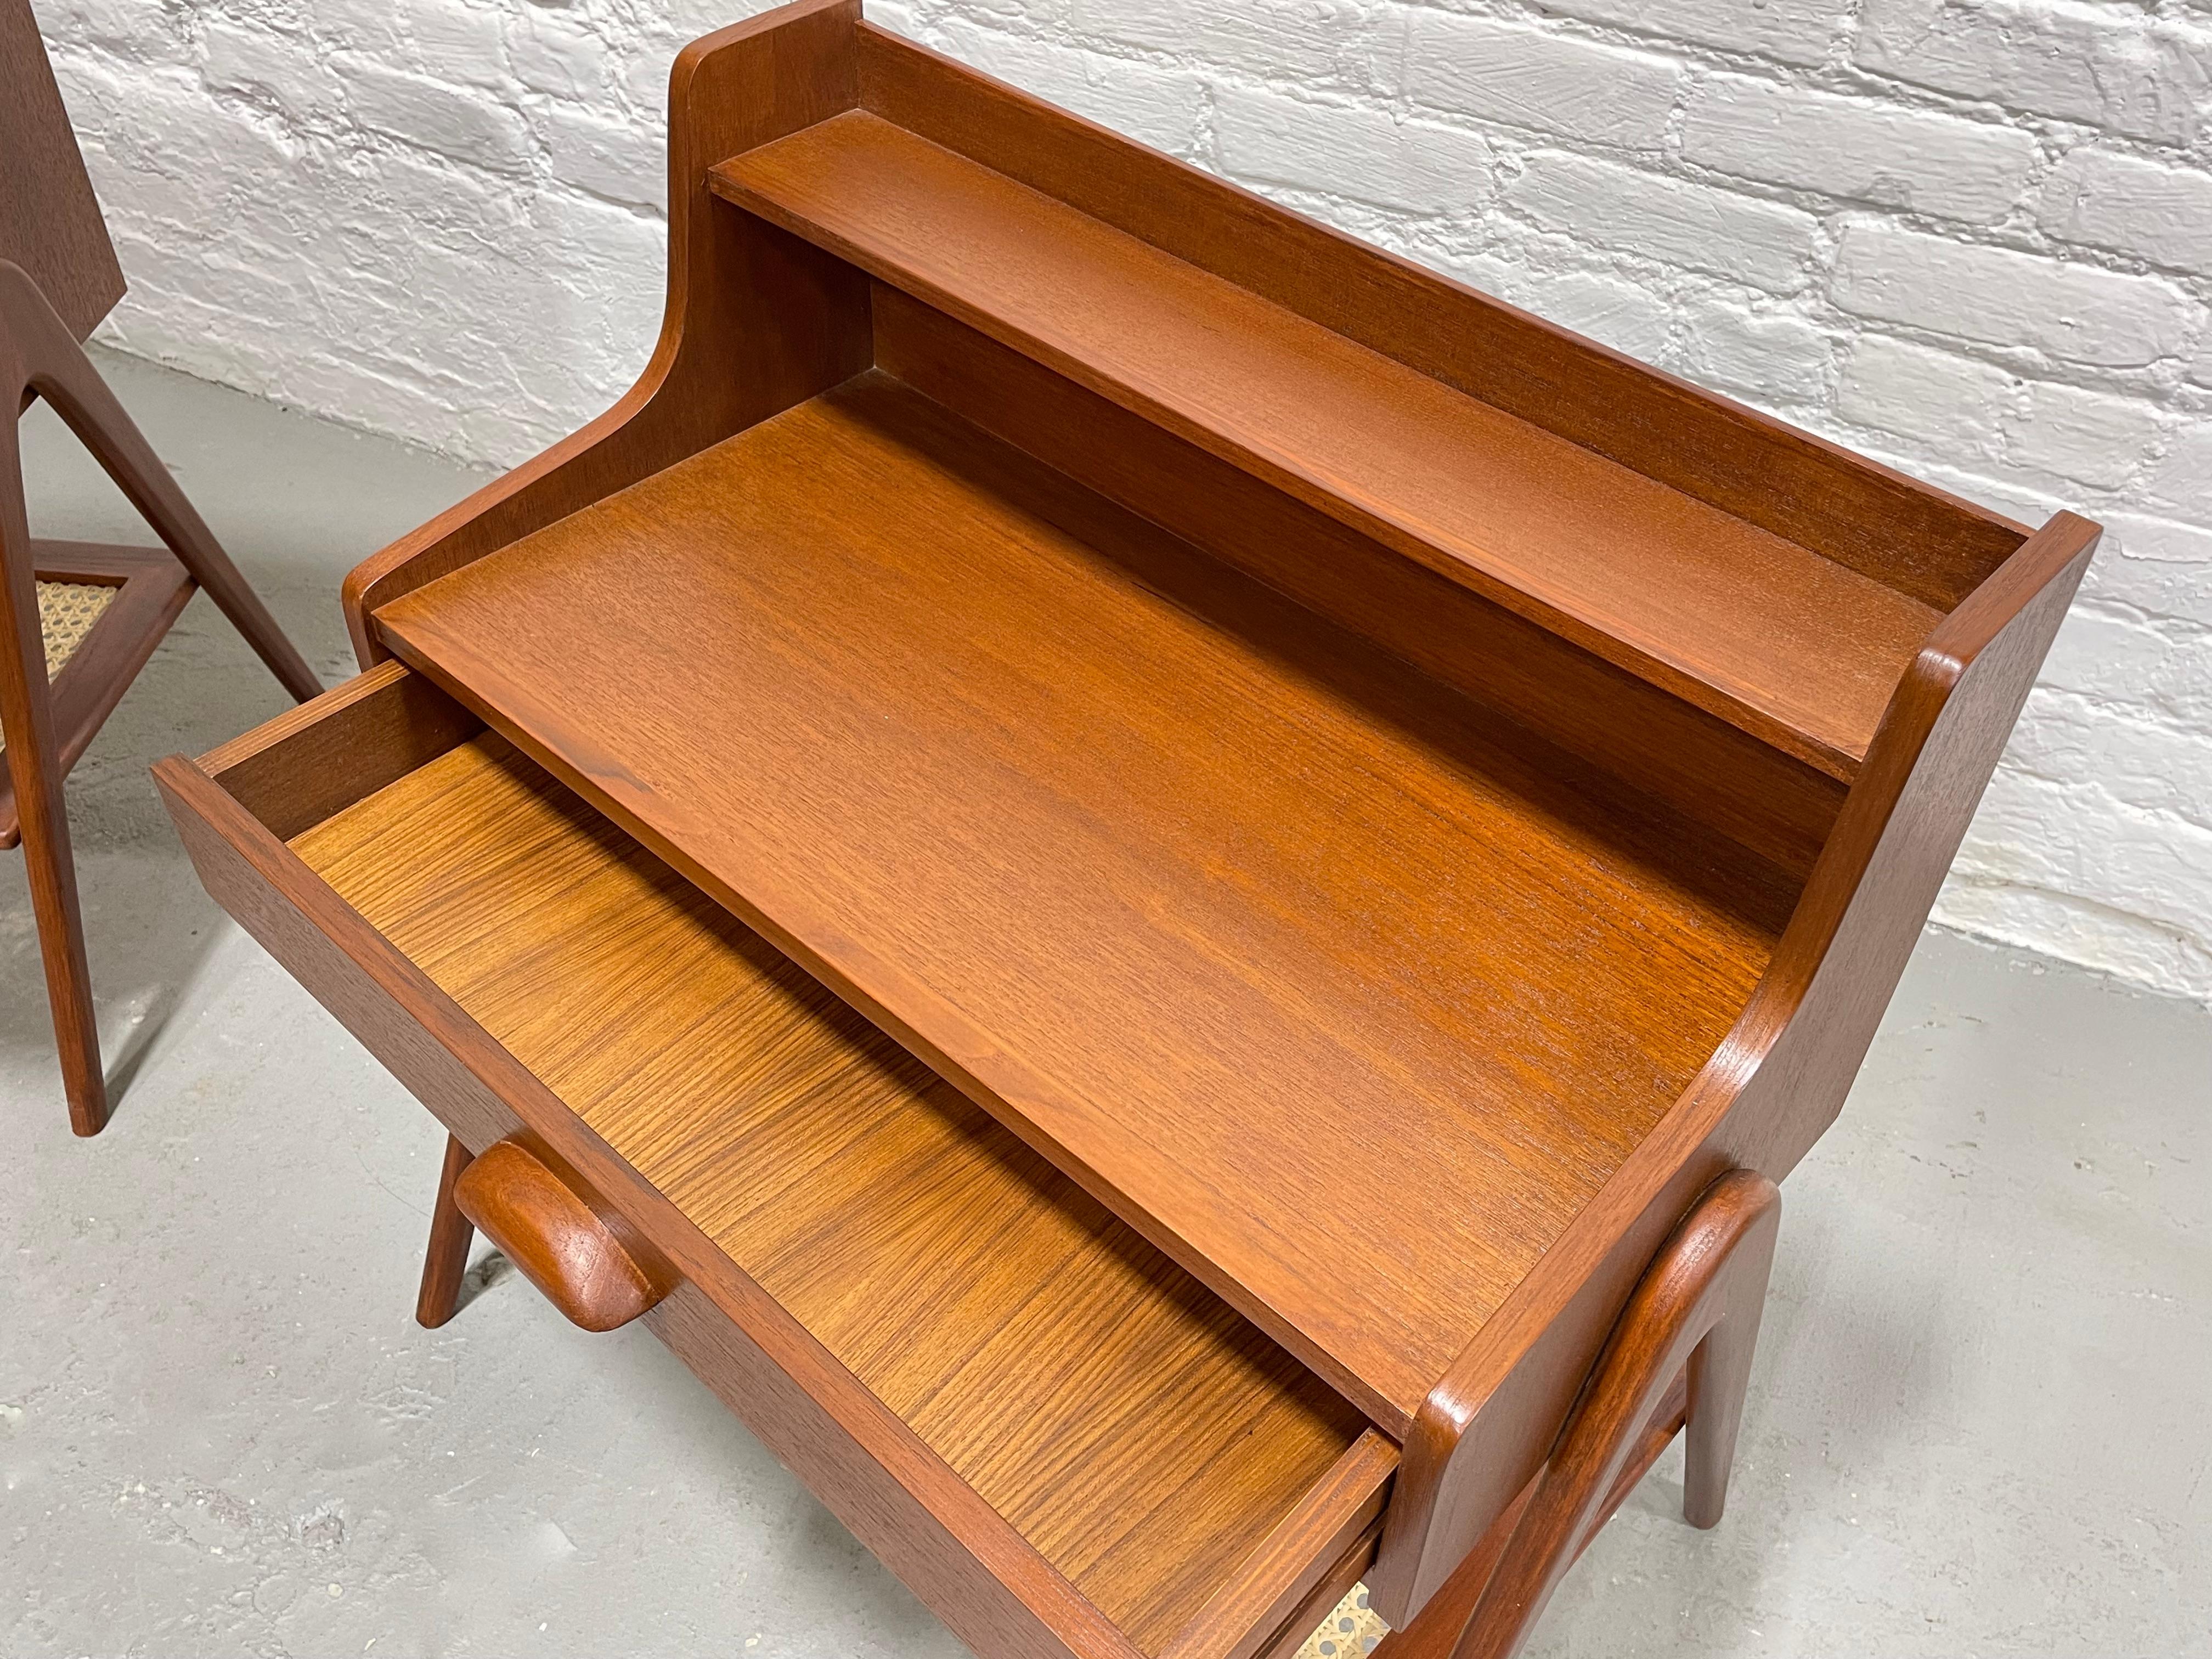 Pair of Mid-Century Modern Handcrafted Caned Teak Cabinets / Entryway Tables For Sale 4